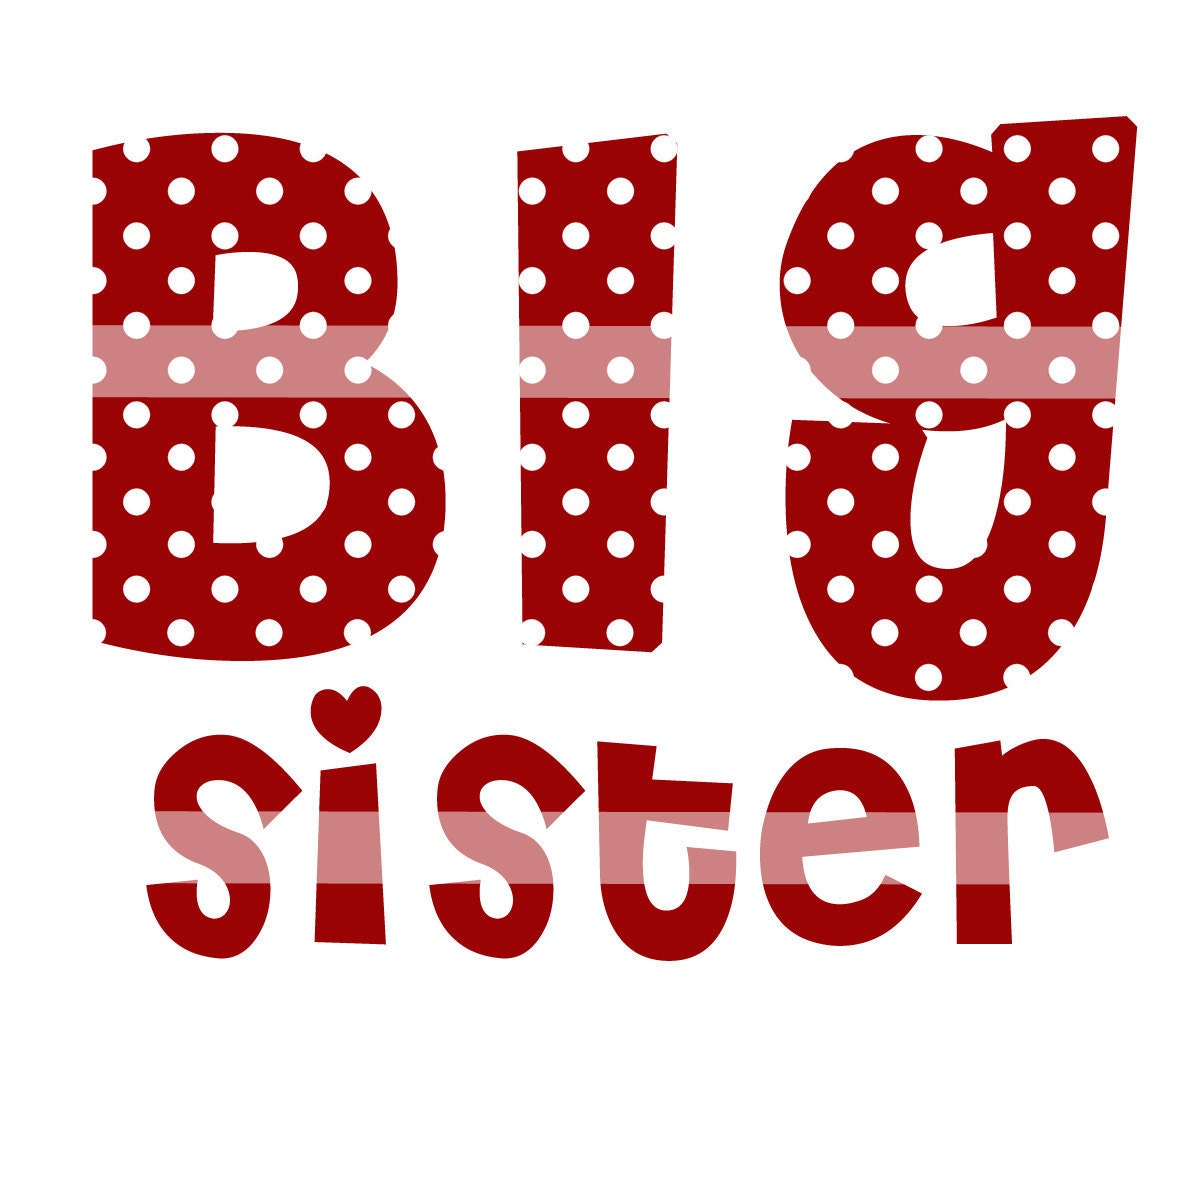 DIY Printable Big Sister Iron On Transfer in Red by pixelilicious